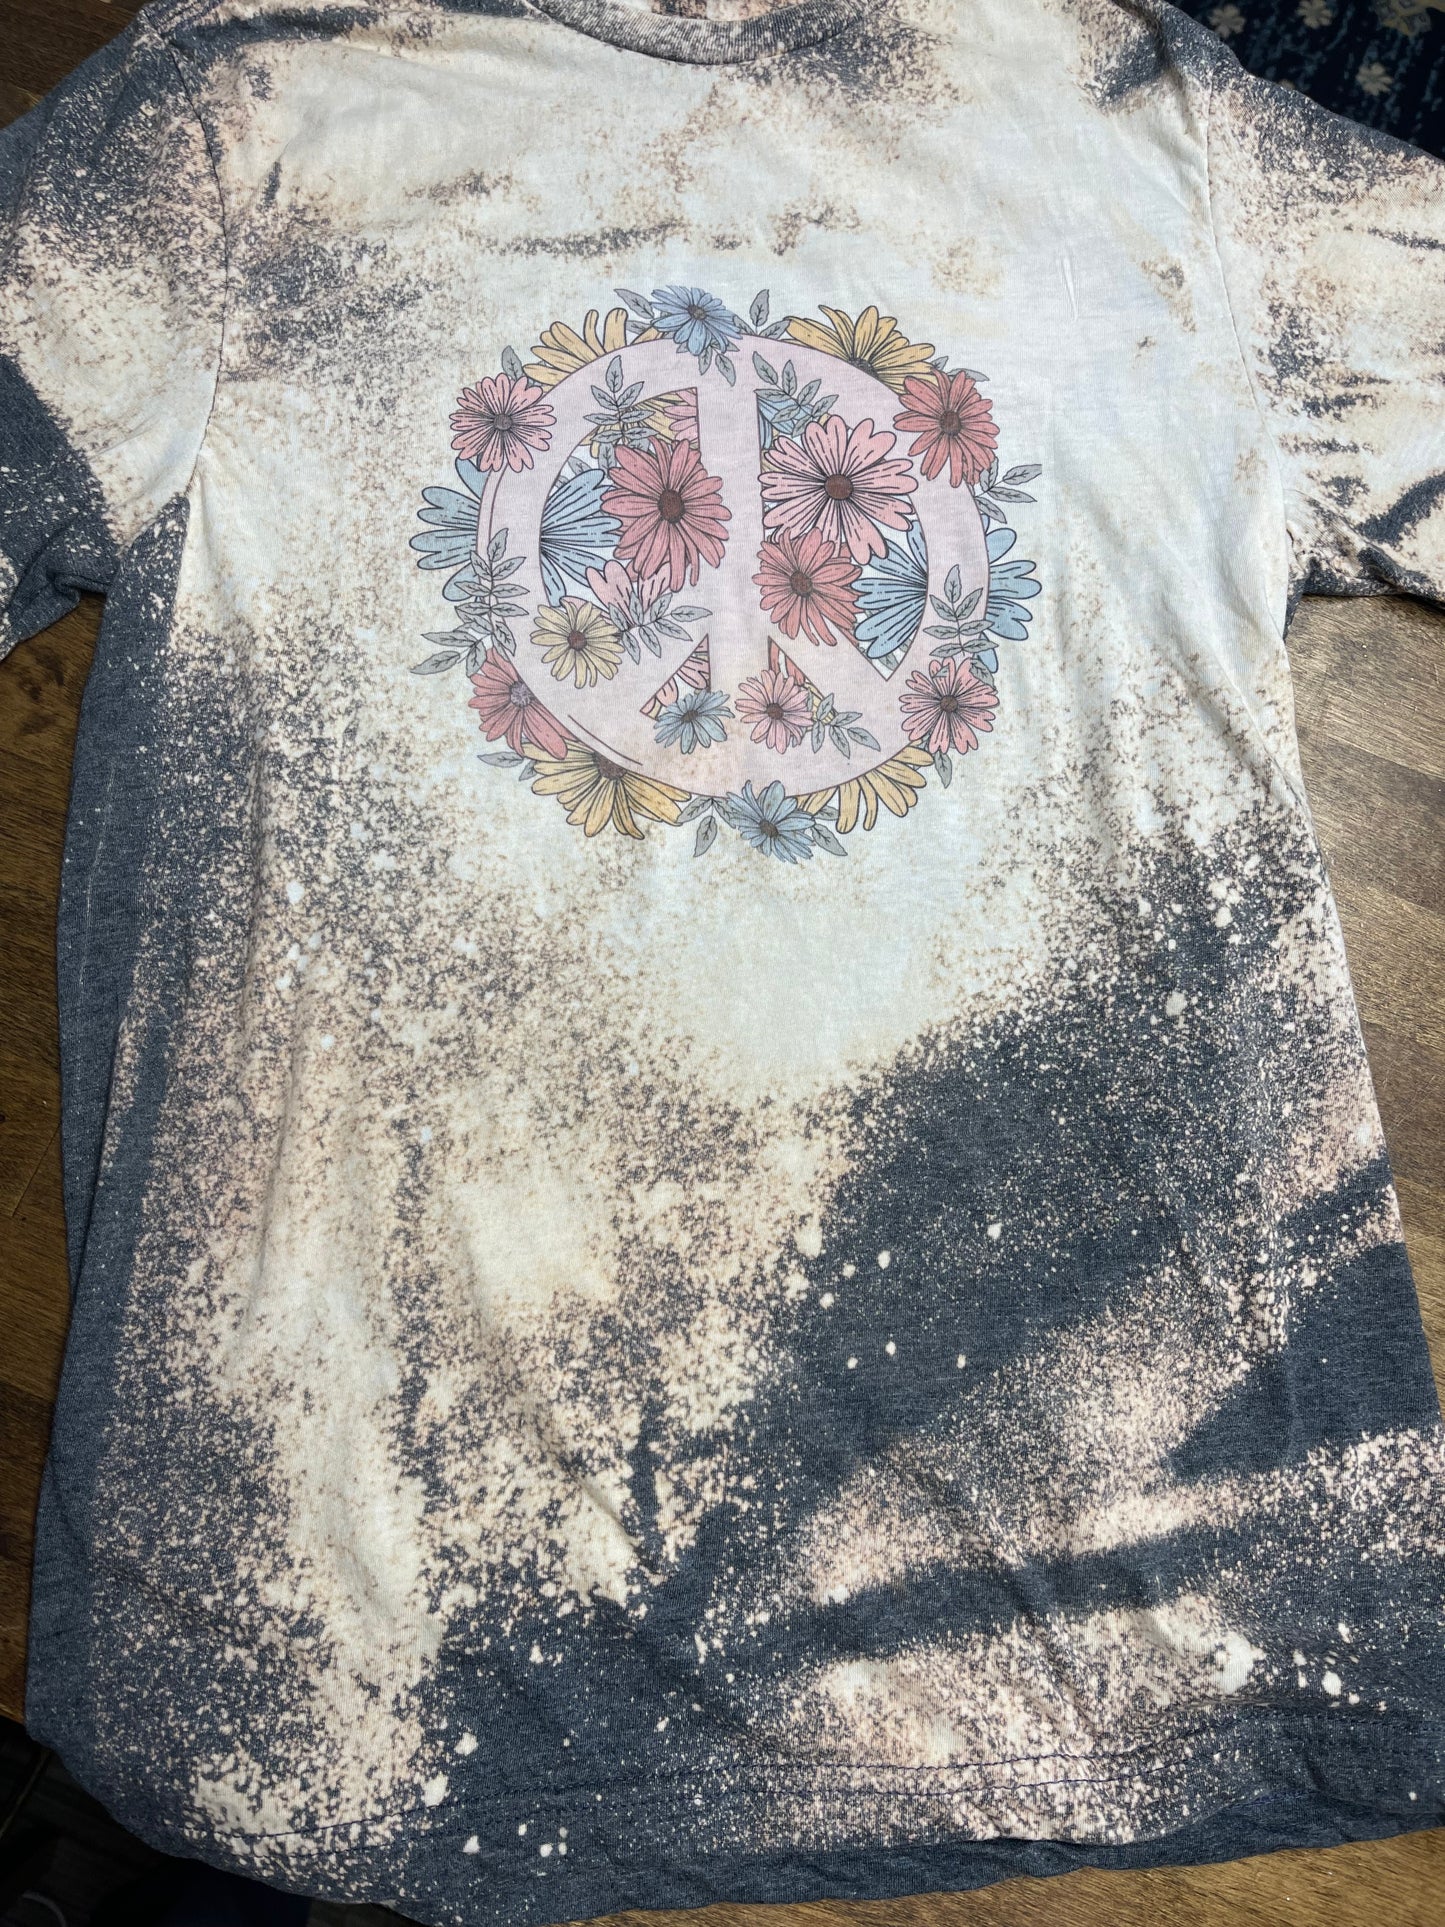 Floral Peace Graphic tee